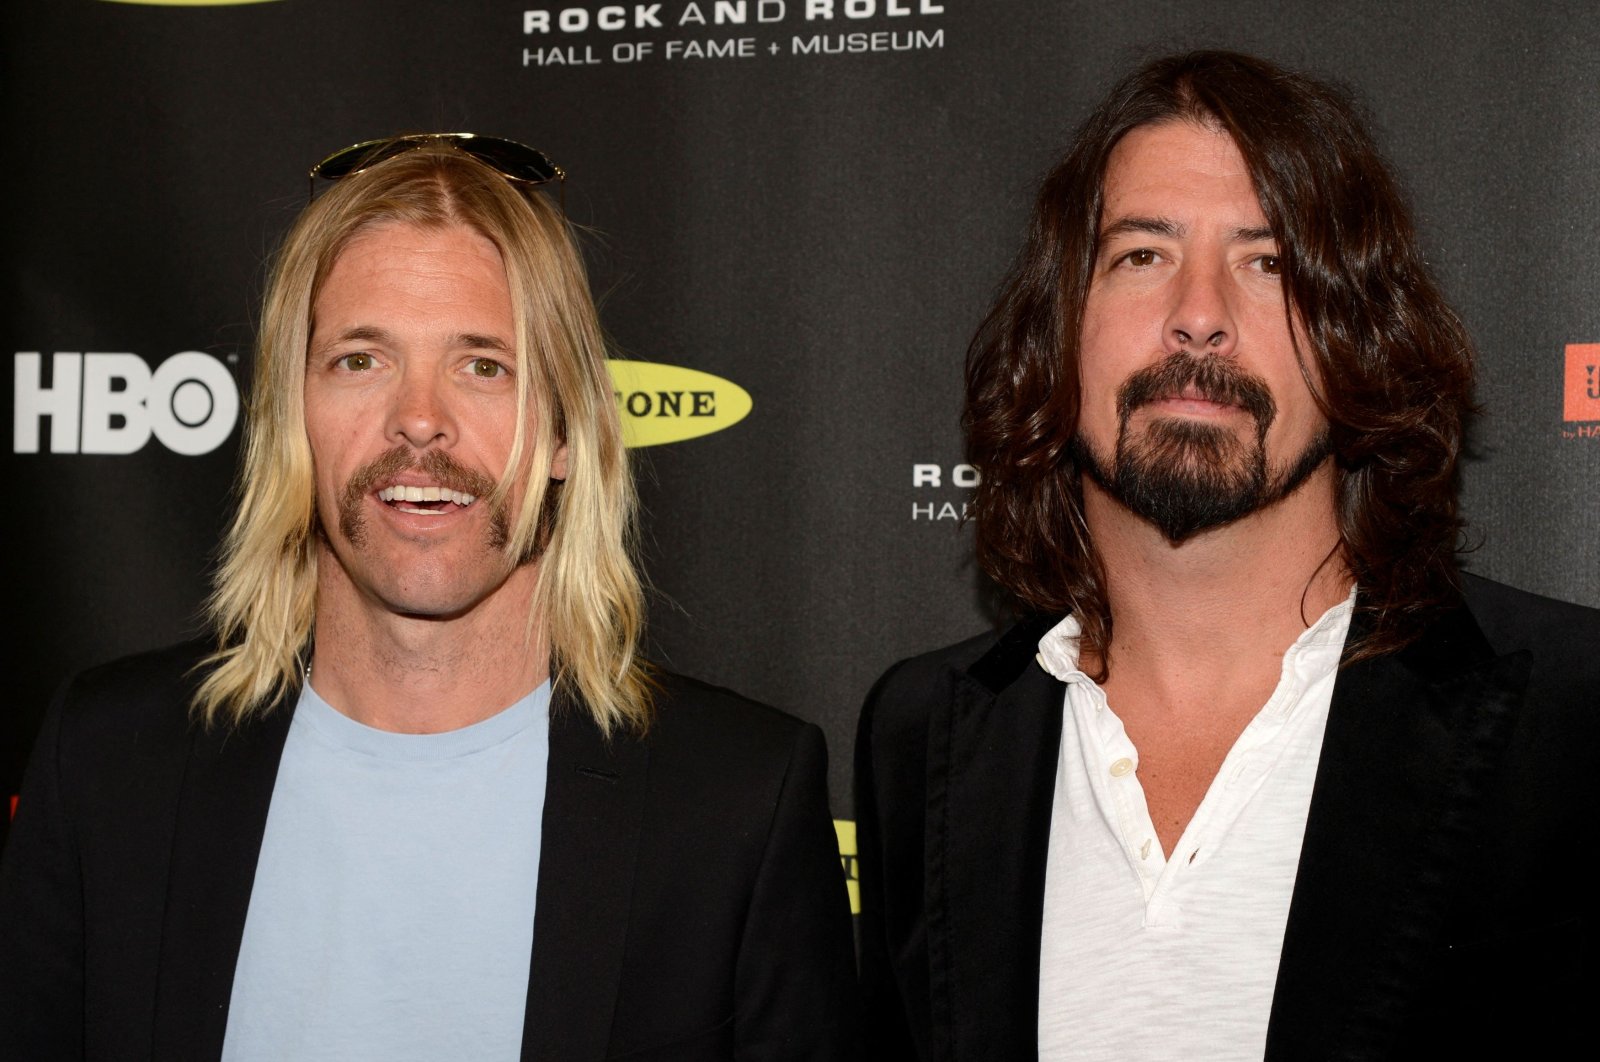 Taylor Hawkins (L) and Dave Grohl of the Foo Fighters arrive at the 2013 Rock and Roll Hall of Fame induction ceremony in Los Angeles, U.S., April 18, 2013. (Reuters Photo)